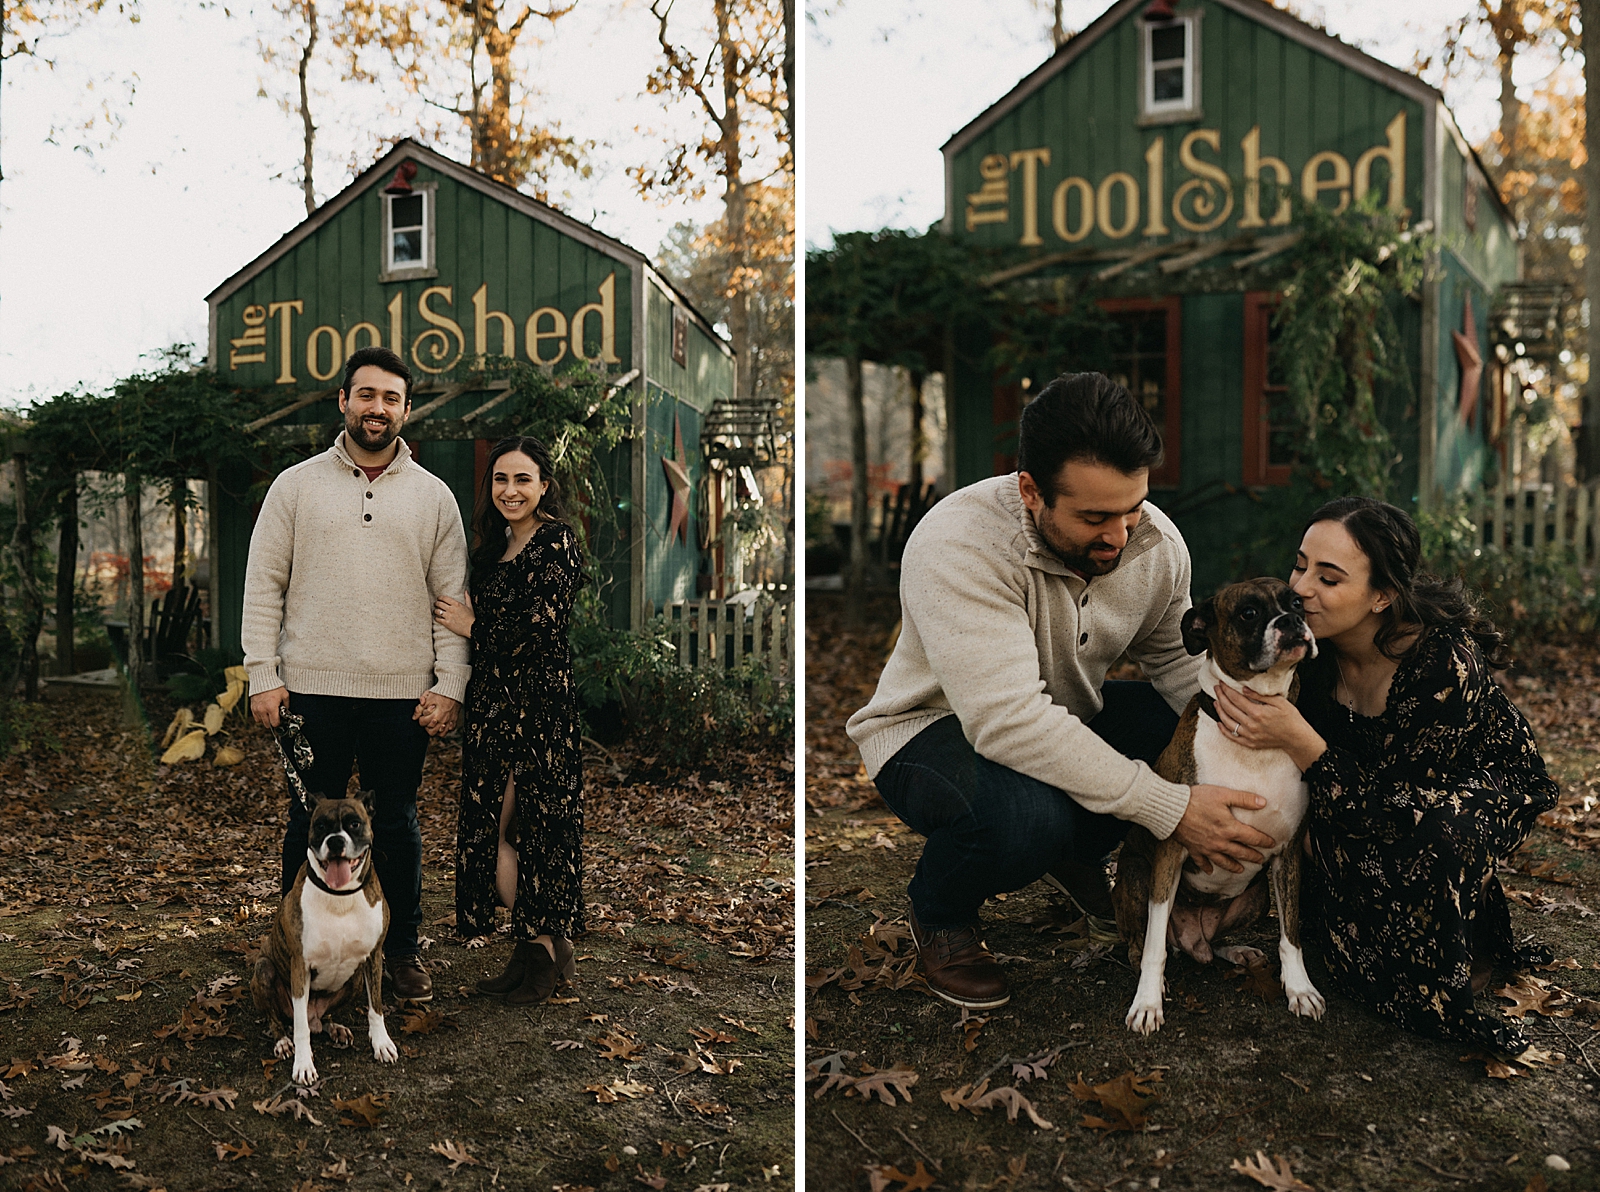 Couple standing together with dog on leash in front of The Tool Shed